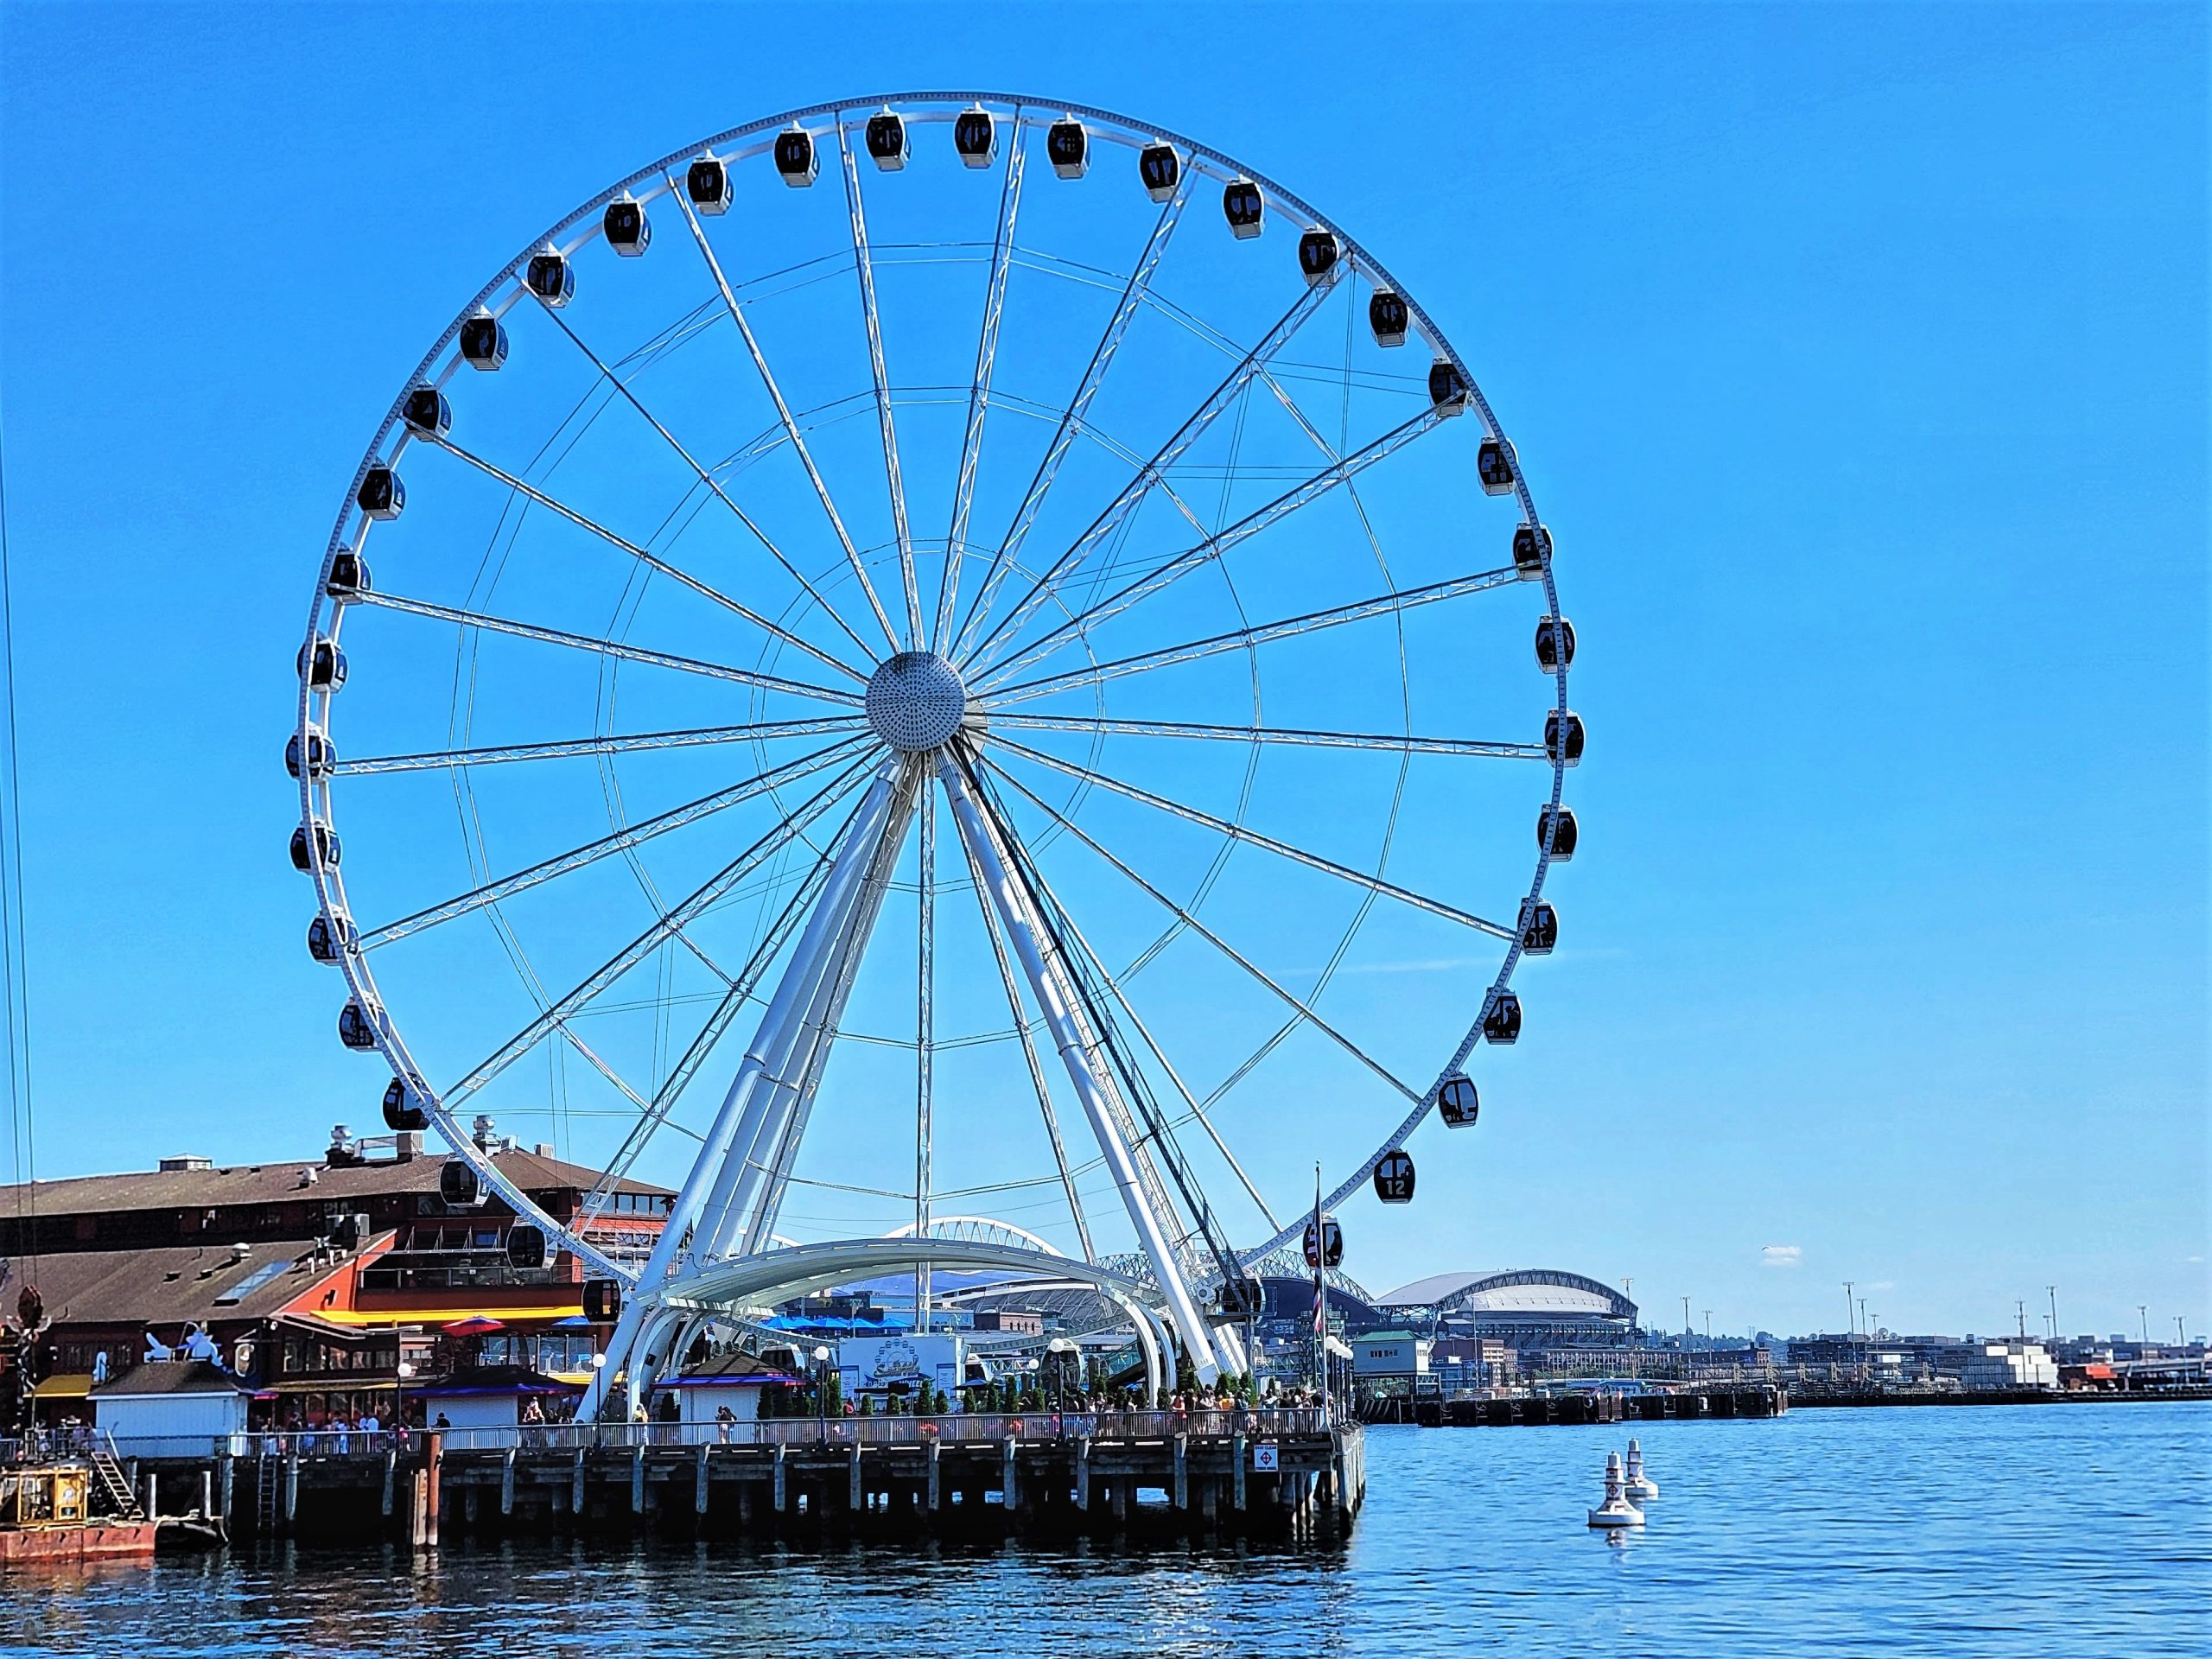 The Seattle Great Wheel is a fun way for families to experience Seattle. Photo courtesy of Nancy Schretter